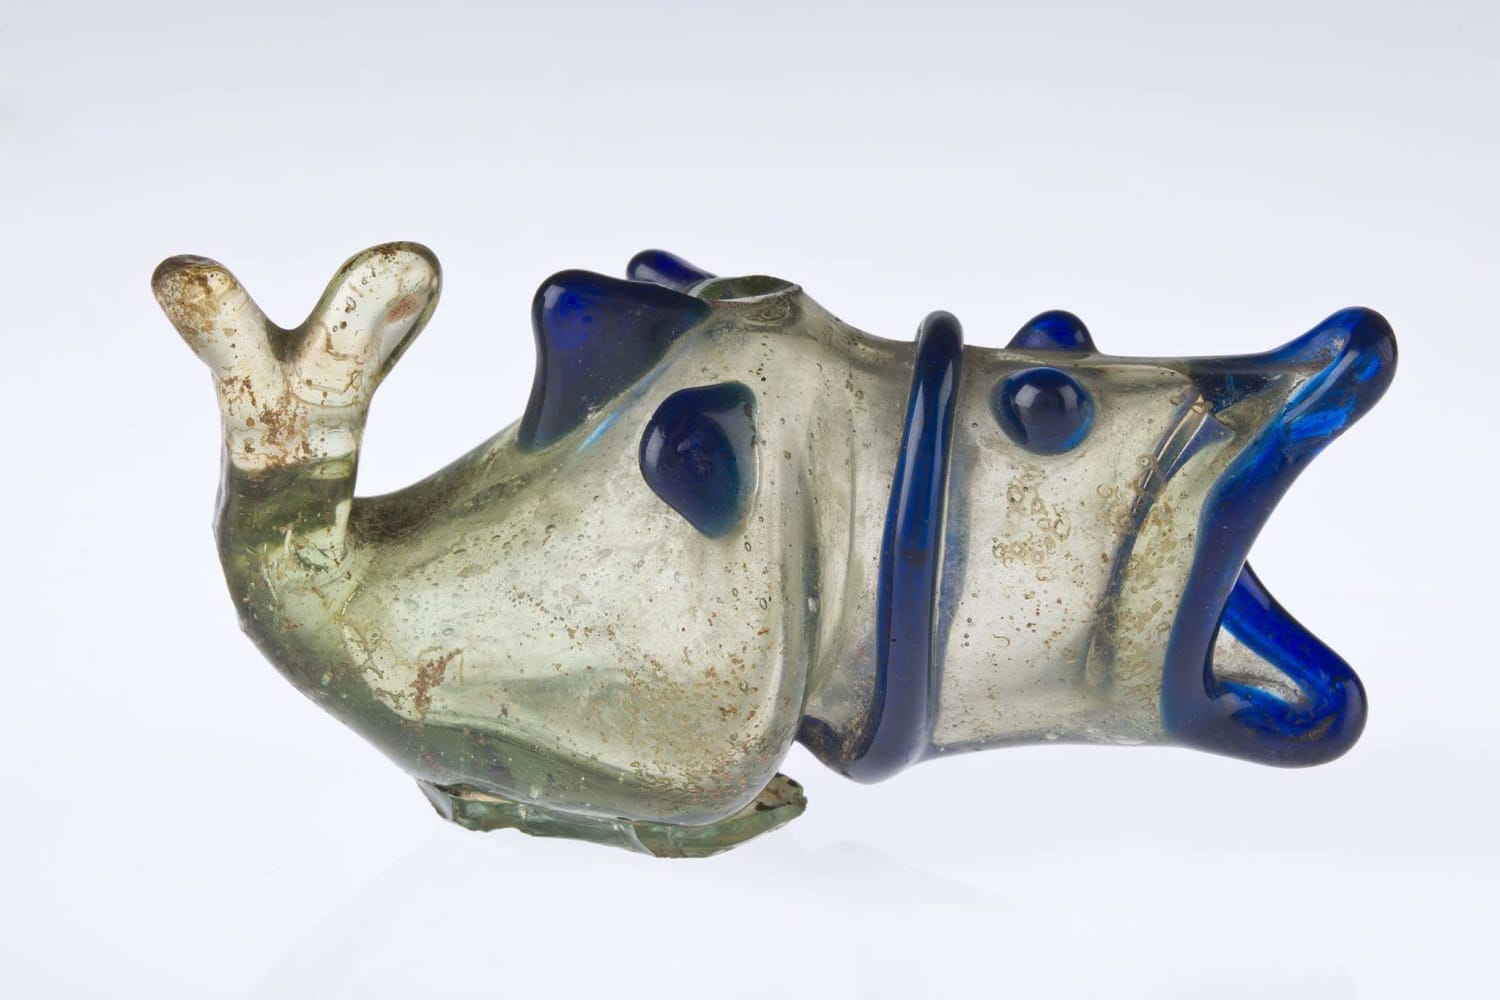 An Umayyad glass flask in the shape of a fish, used as a container for perfume, balsam or kohl. Made in Egypt or Syria, 7th-8th century CE, now on display at the Museum of Islamic Art in Doha, Qatar